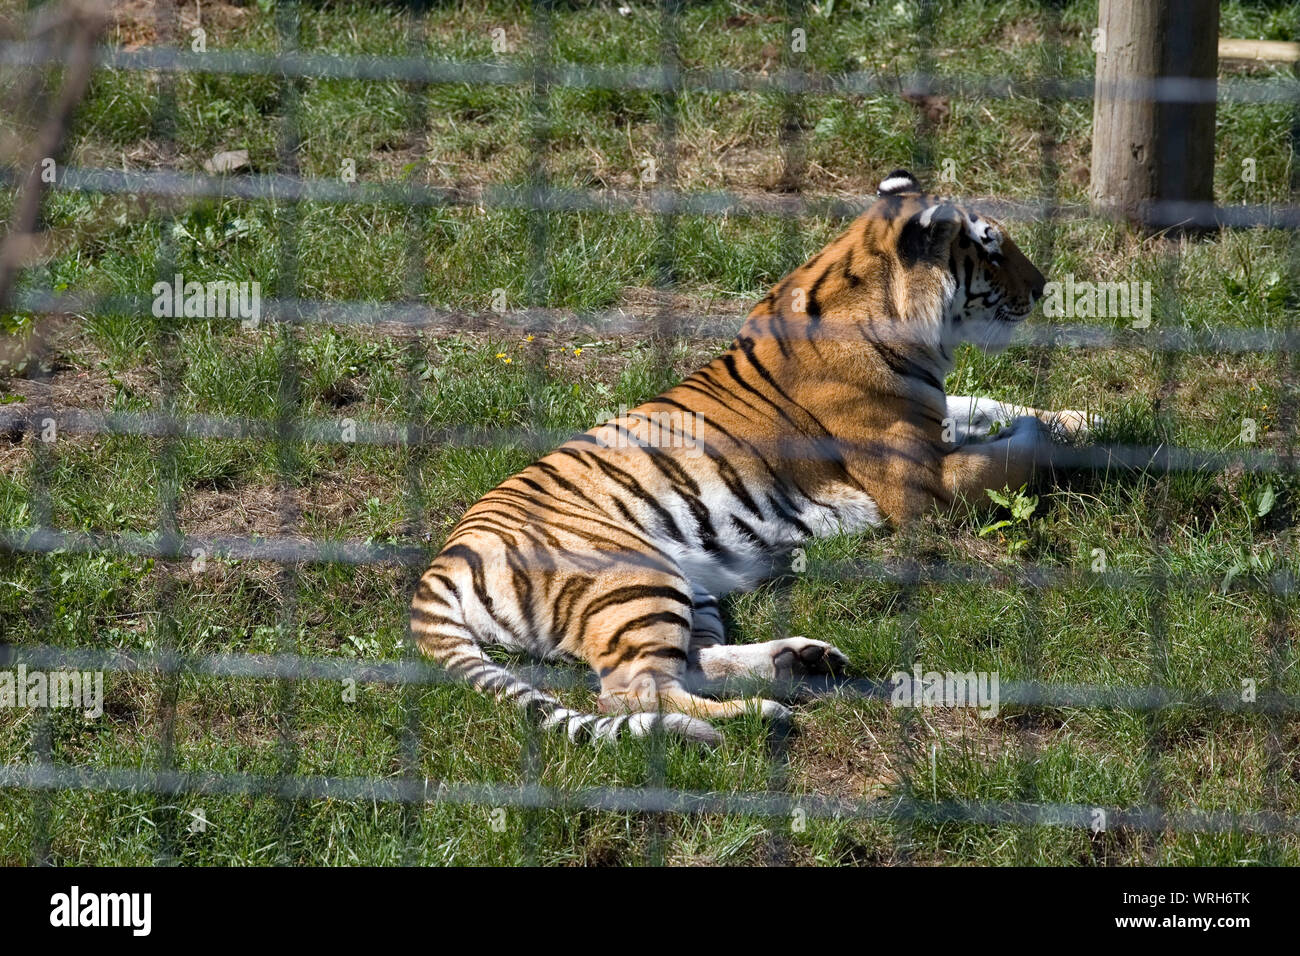 Endangered Amur tiger in wire bounded enclosure at Whipsnade zoo Stock Photo